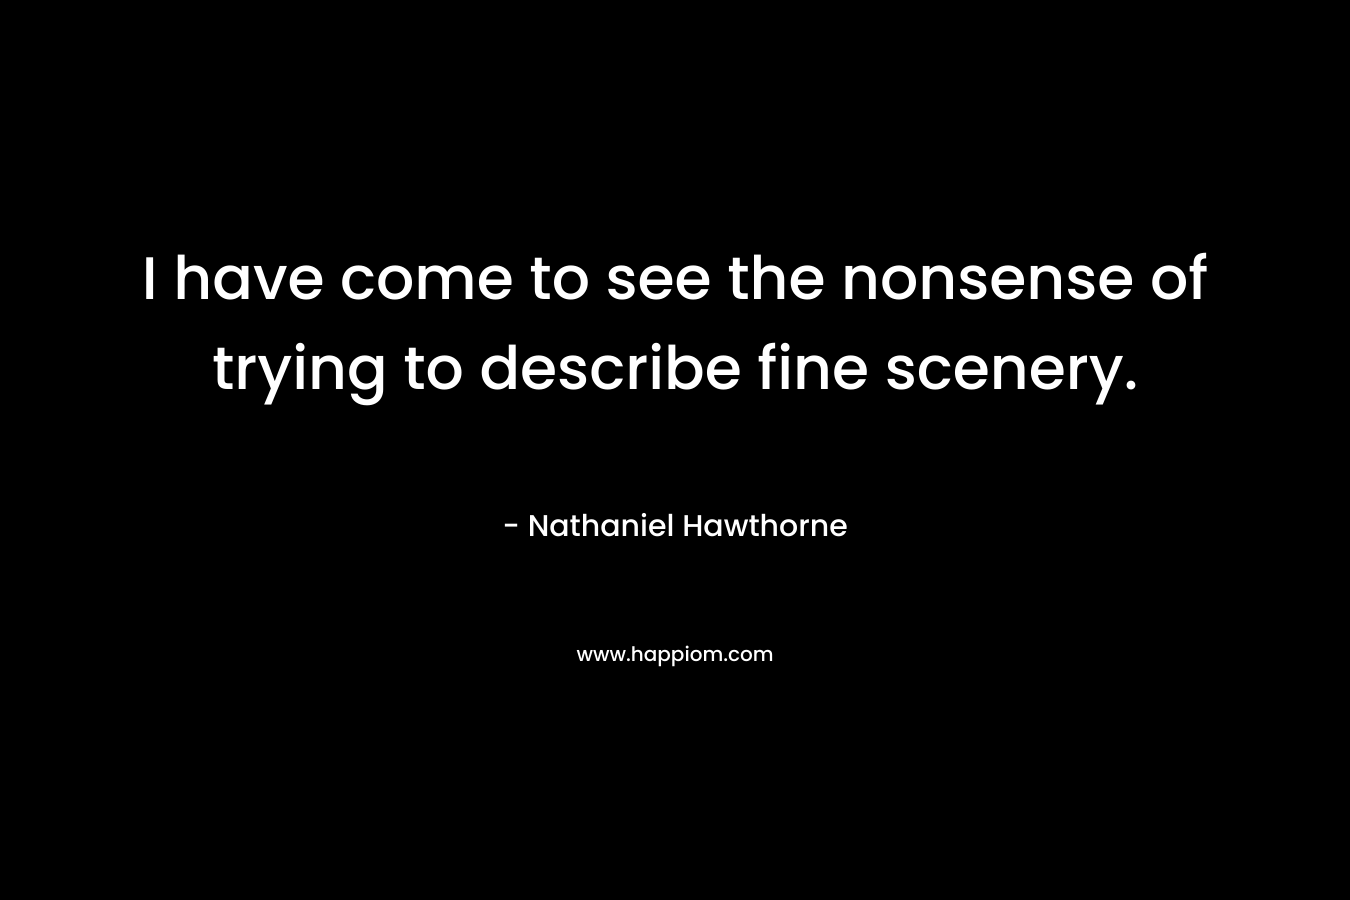 I have come to see the nonsense of trying to describe fine scenery. – Nathaniel Hawthorne